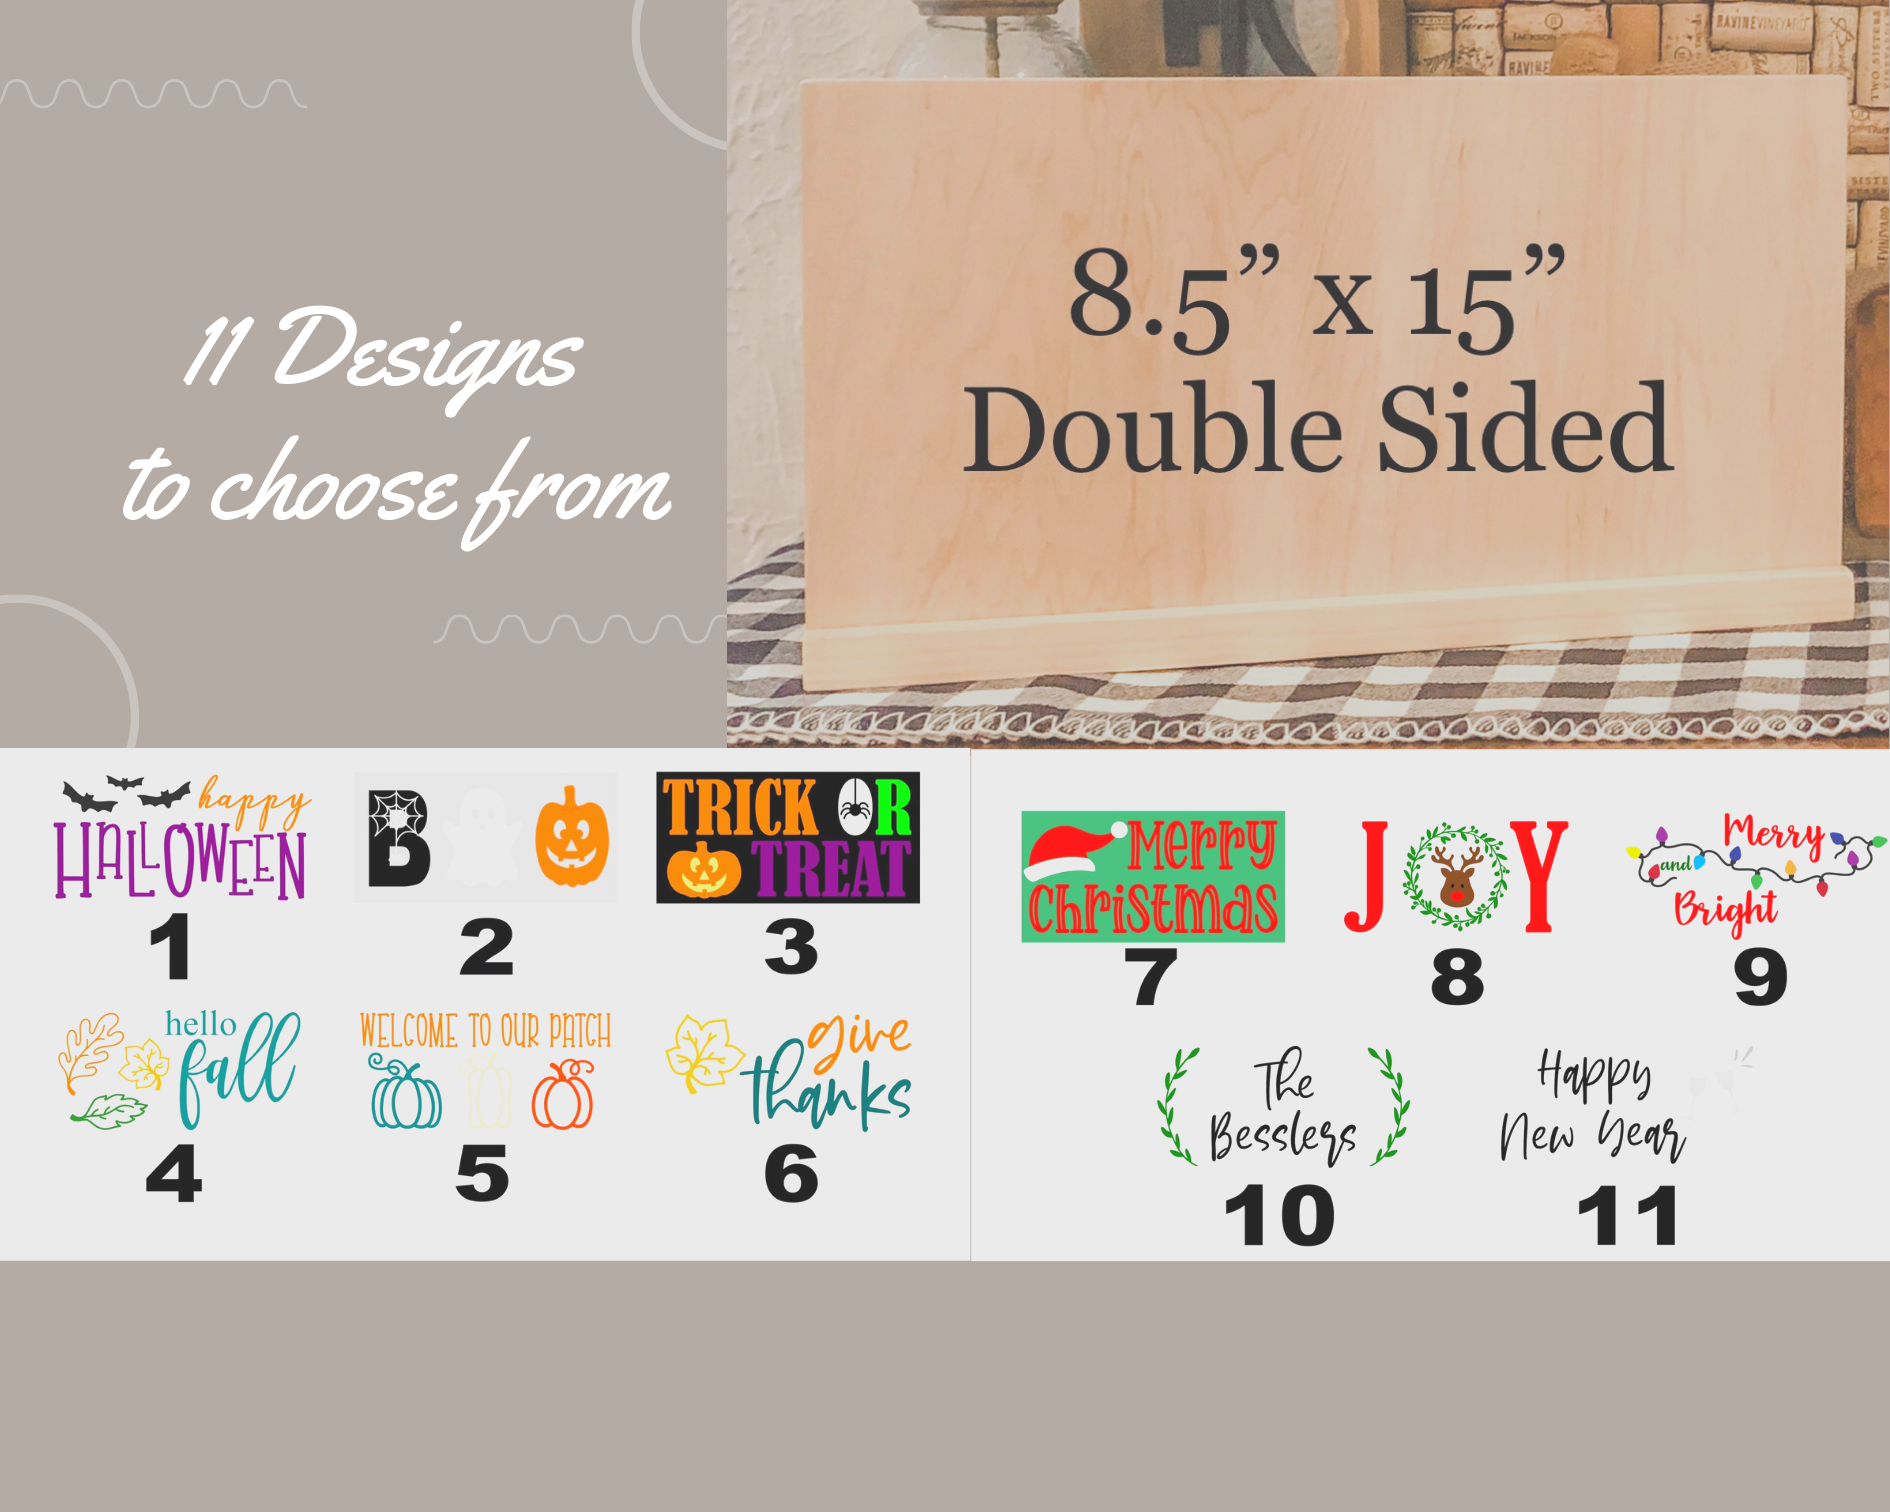 Double Sided 8.5" x 15" Stand Alone Sign (11 design options)